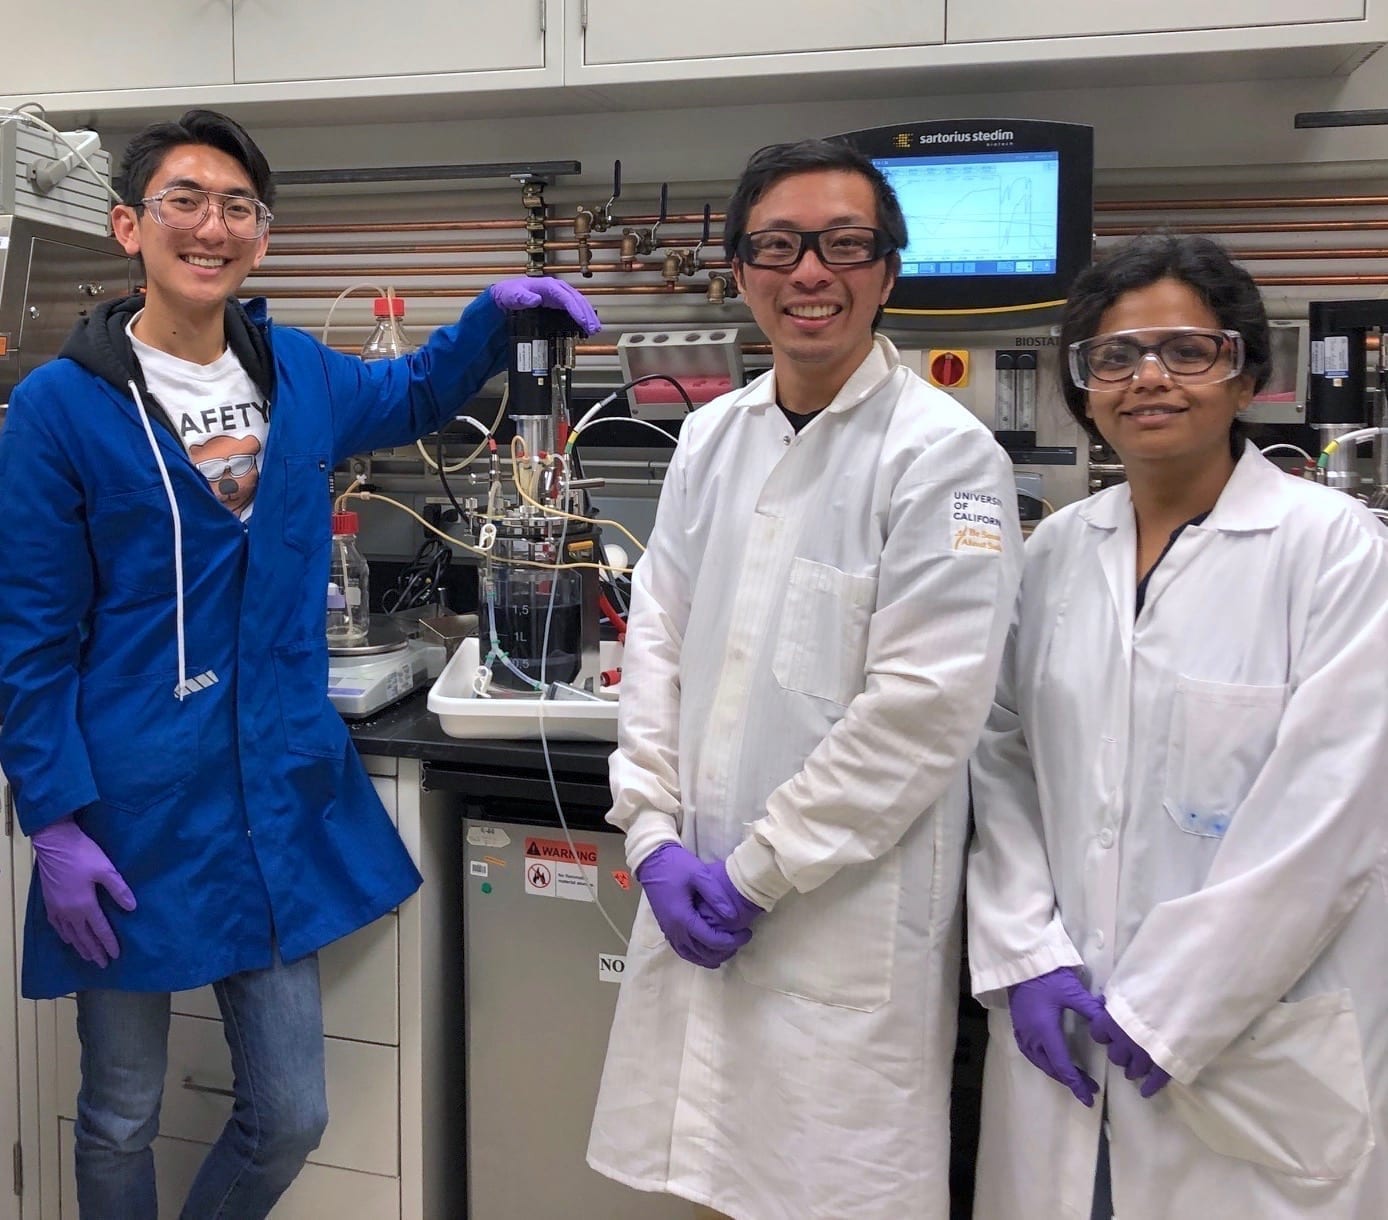 Study authors (from left to right) Andrew K. Lau, Thomas Eng, and Deepanwita Banerjee stand in front of a two-liter bioreactor containing P. putida cells that are producing indigoidine, which causes the strong dark blue color of the liquid. This photo was taken at JBEI in July 2019. (Credit: Berkeley Lab)